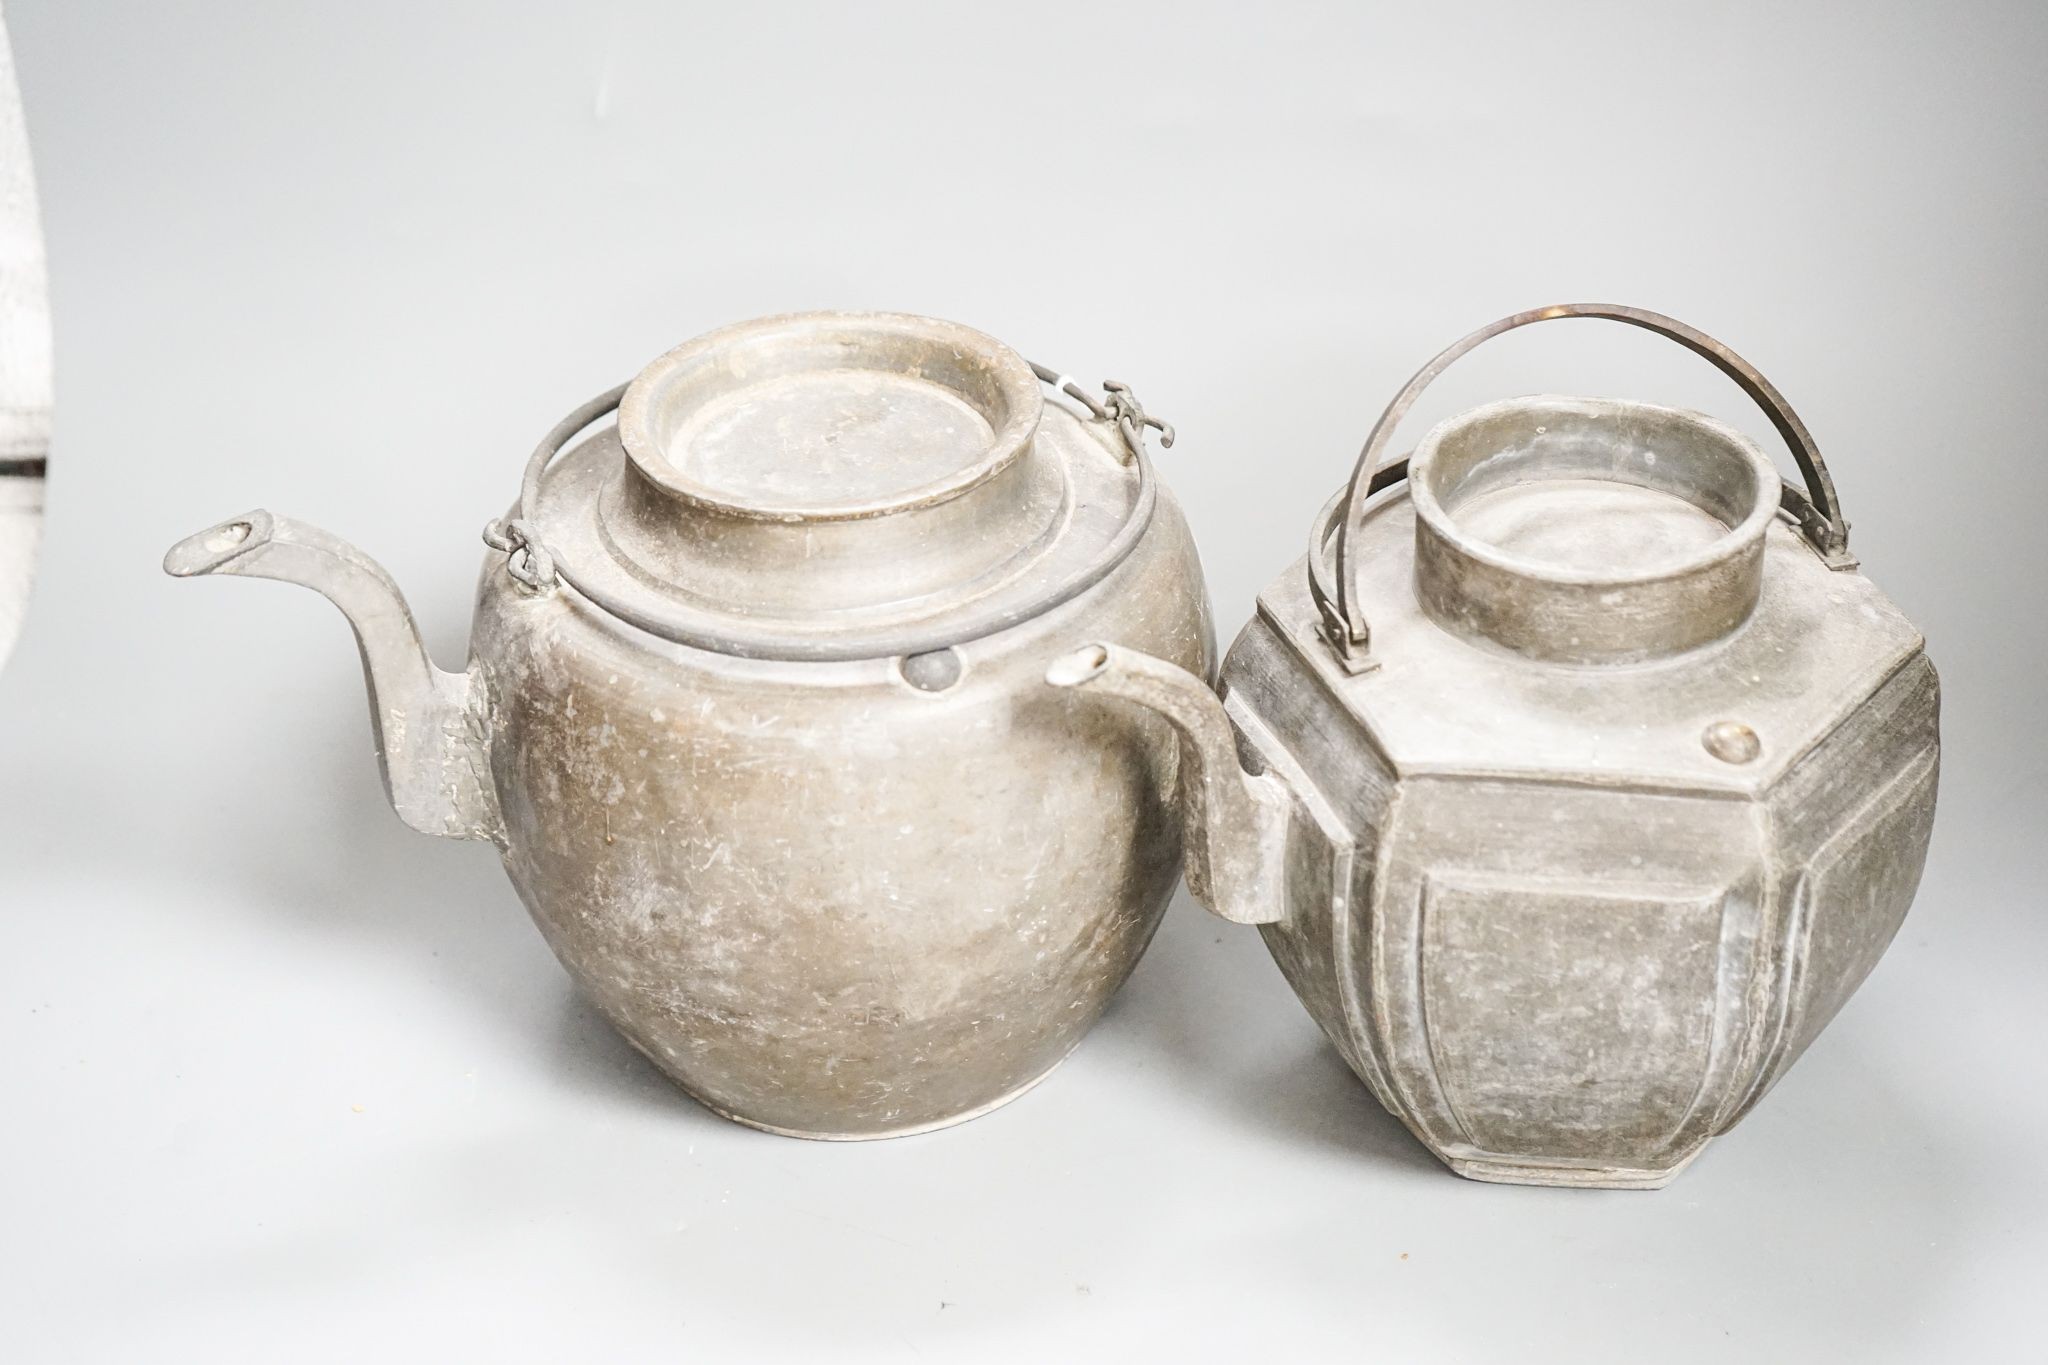 Two Chinese pewter teapots, late 19th/early 20th century, largest 23cm across